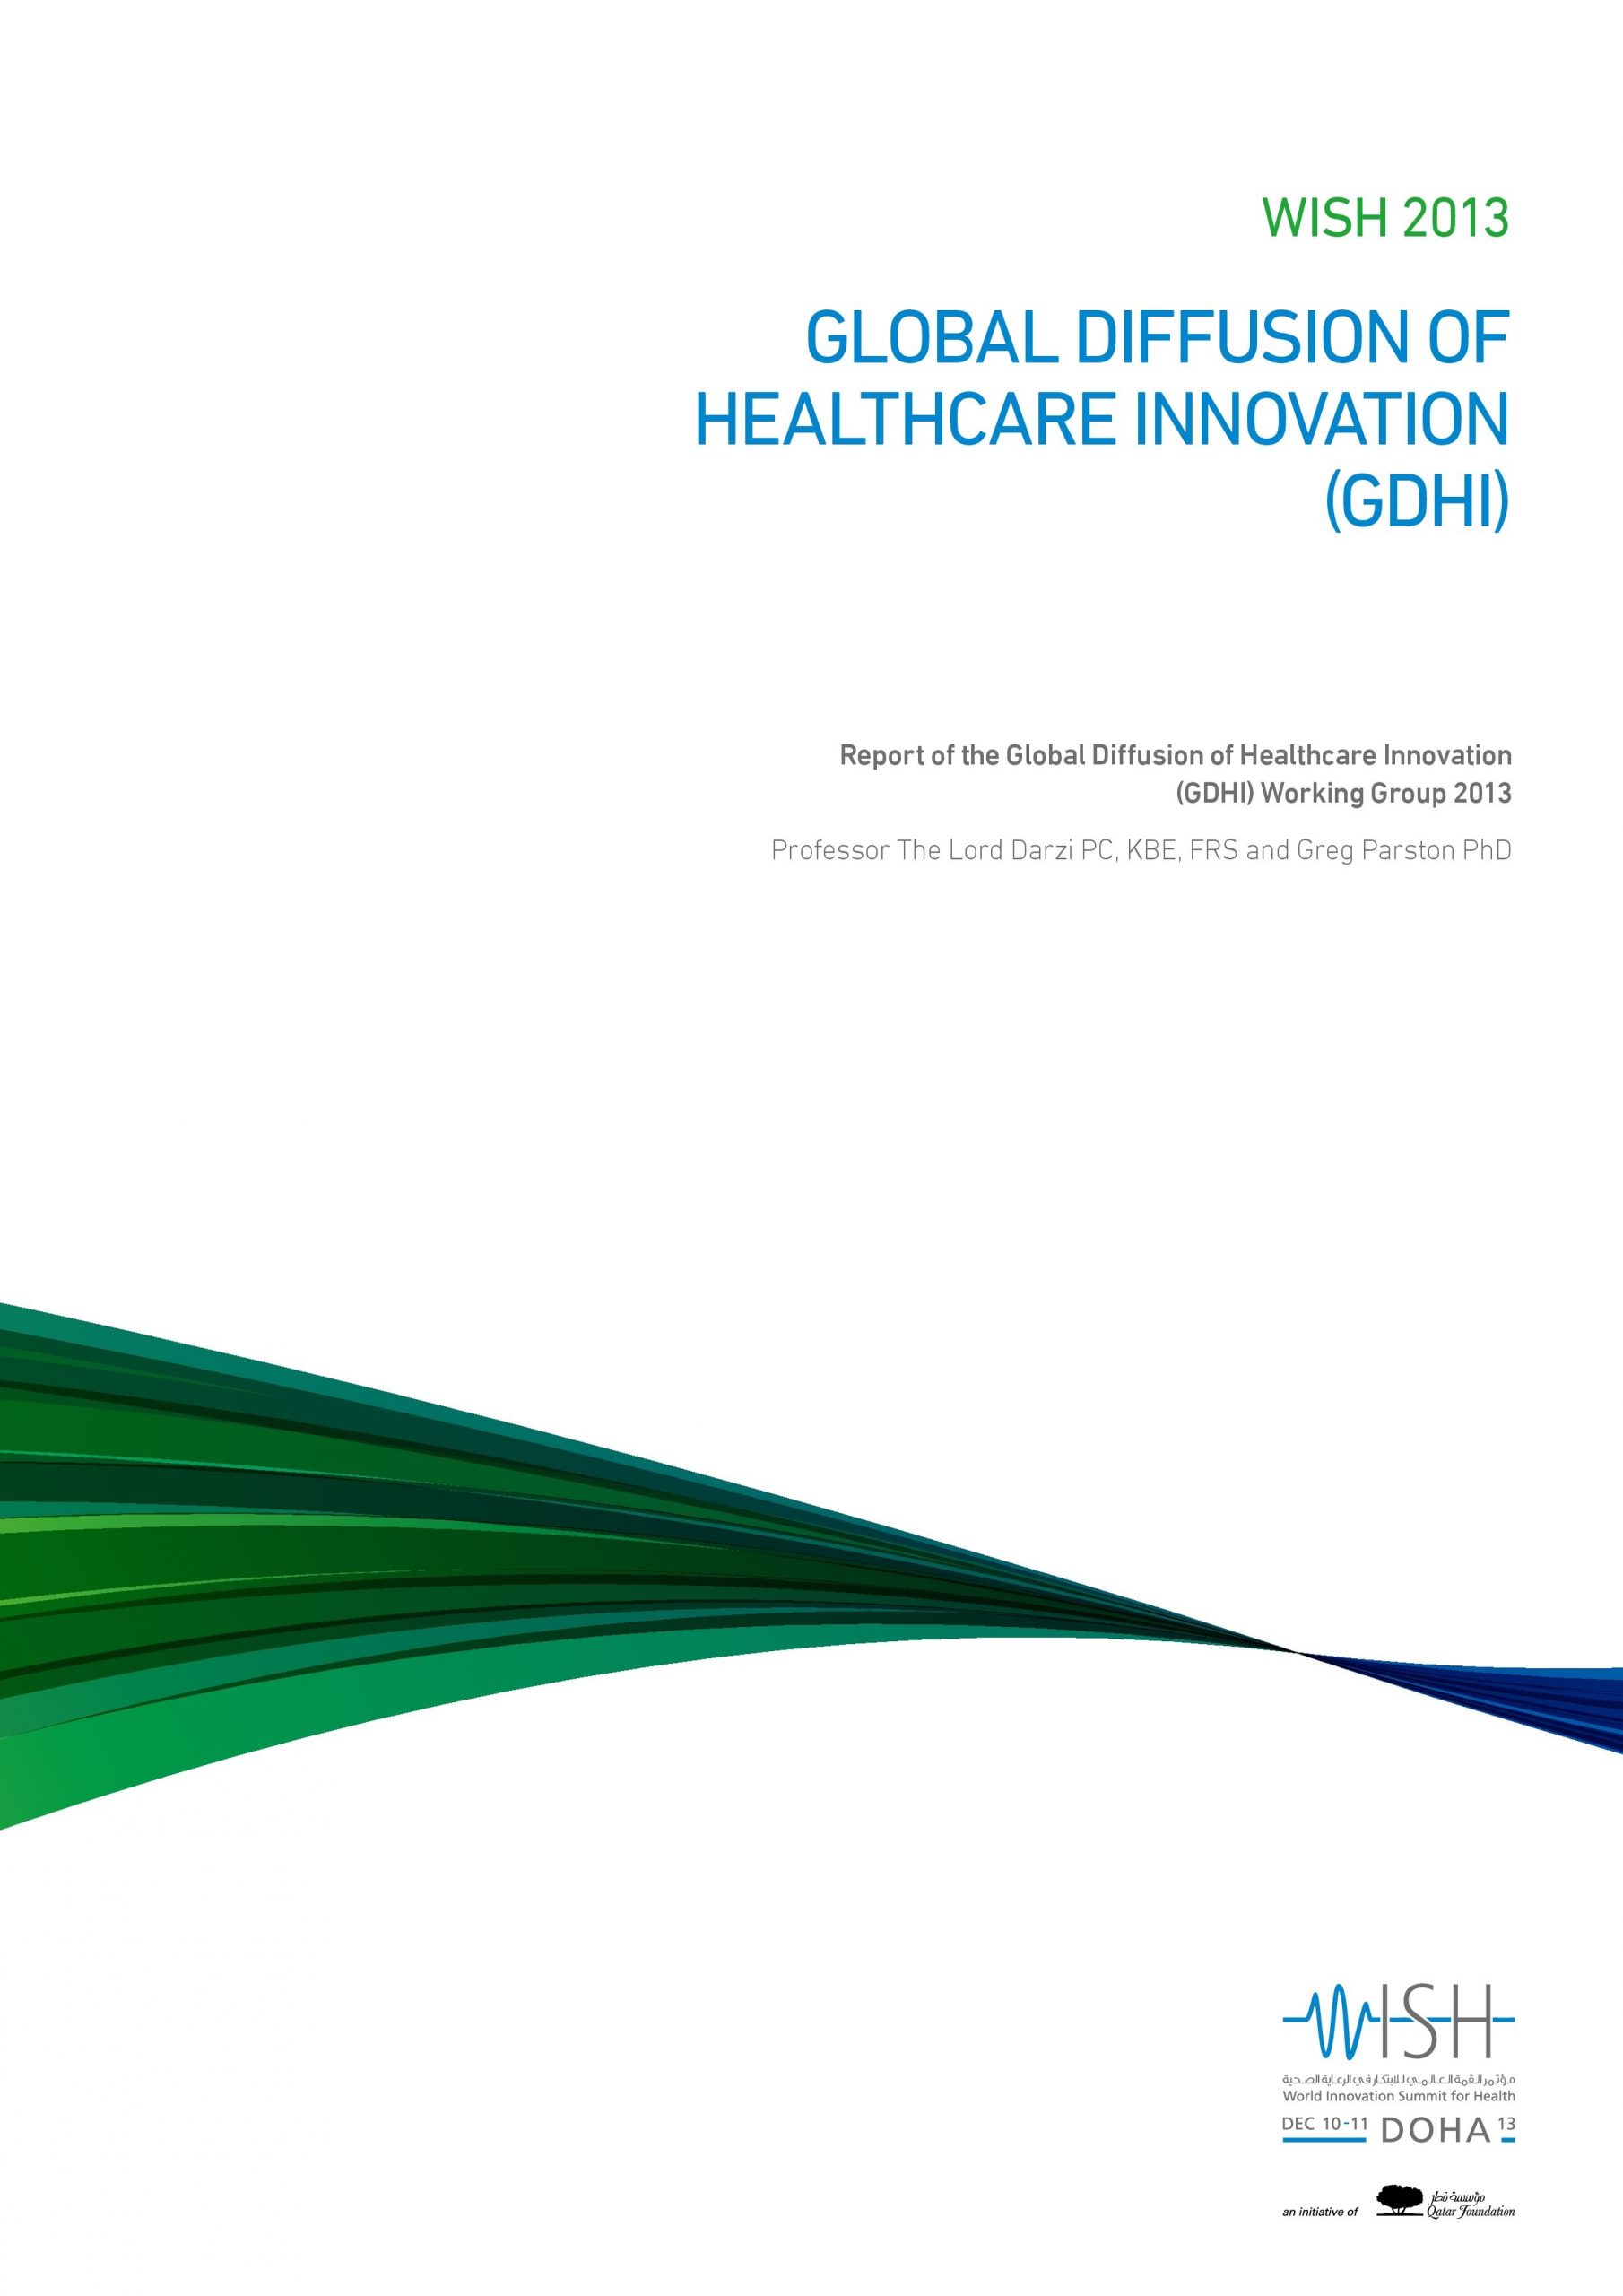 Global Diffusion of Healthcare Innovation (GDHI)